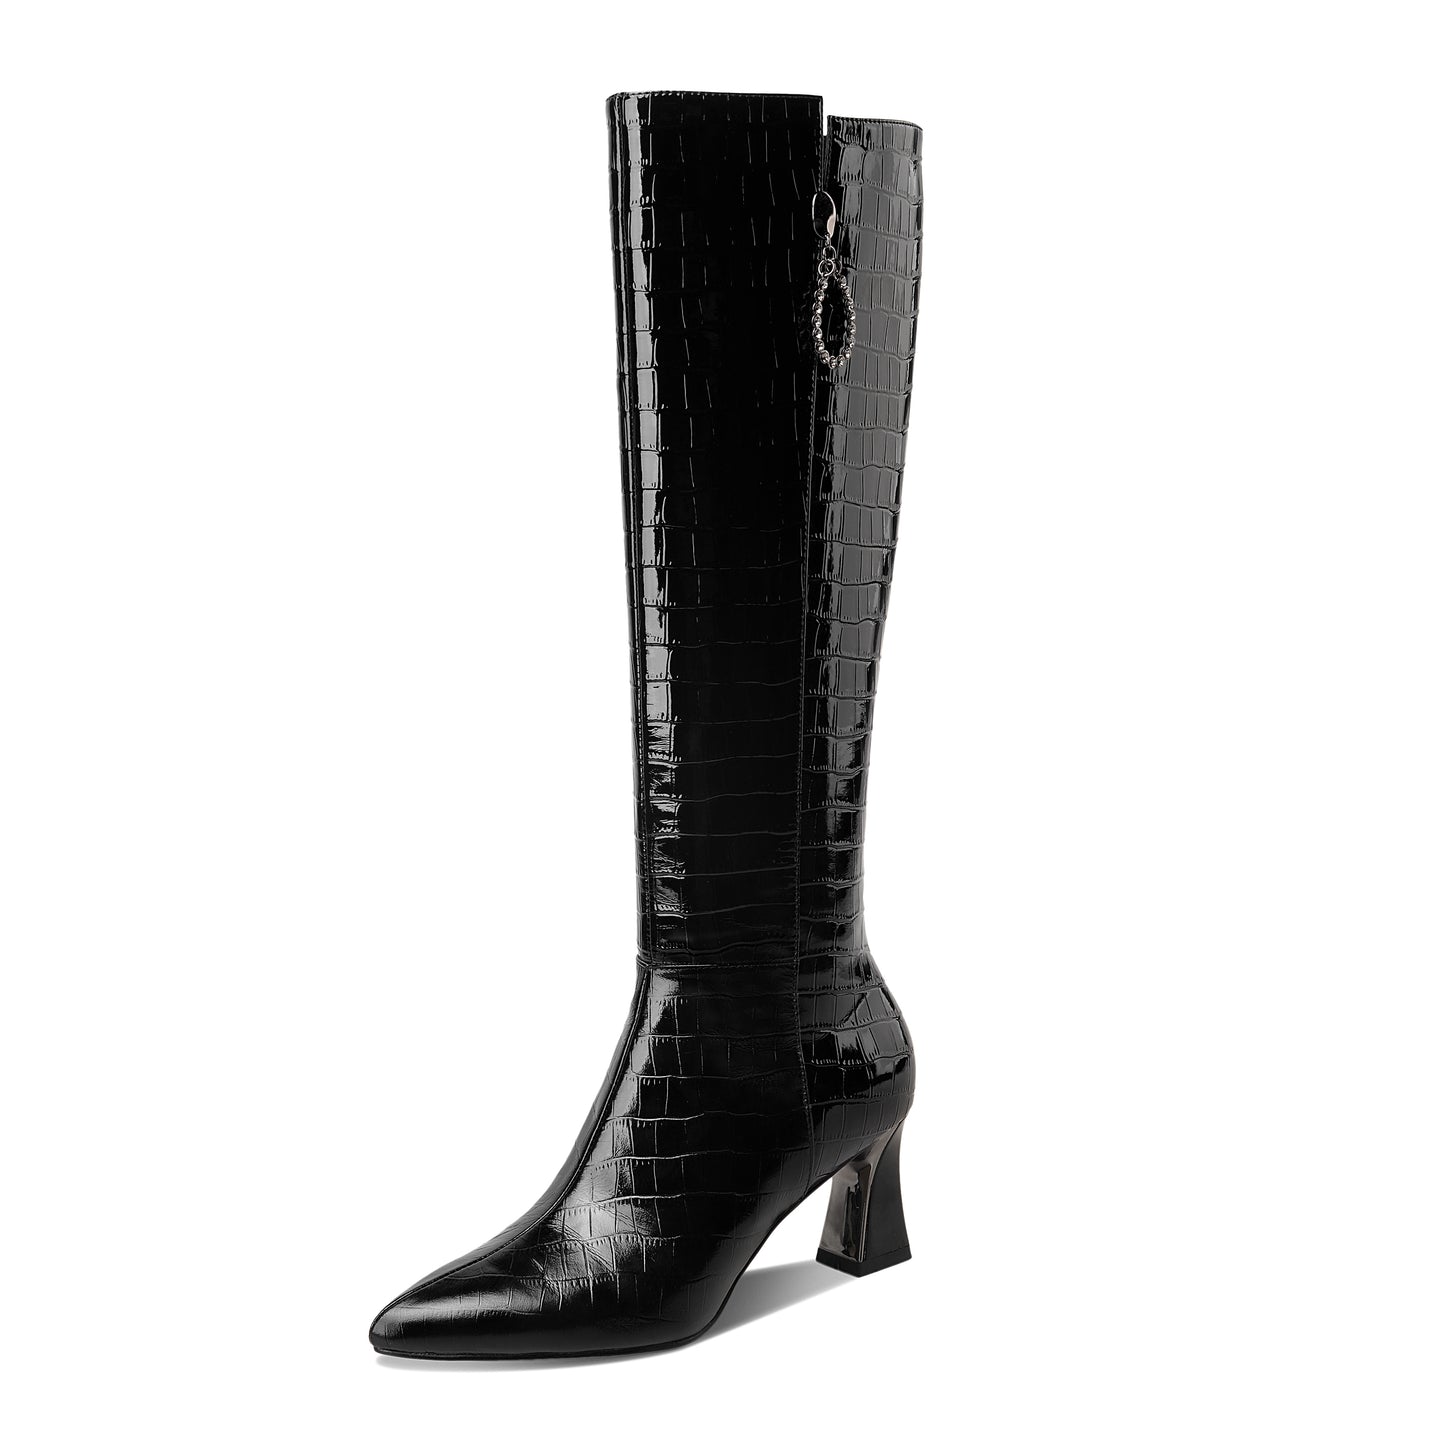 TinaCus Women's Handmade Embossed Genuine Leather Clear Pointed Toe Mid Spool Heel Side Zip Up Classic Black Knee High Boots